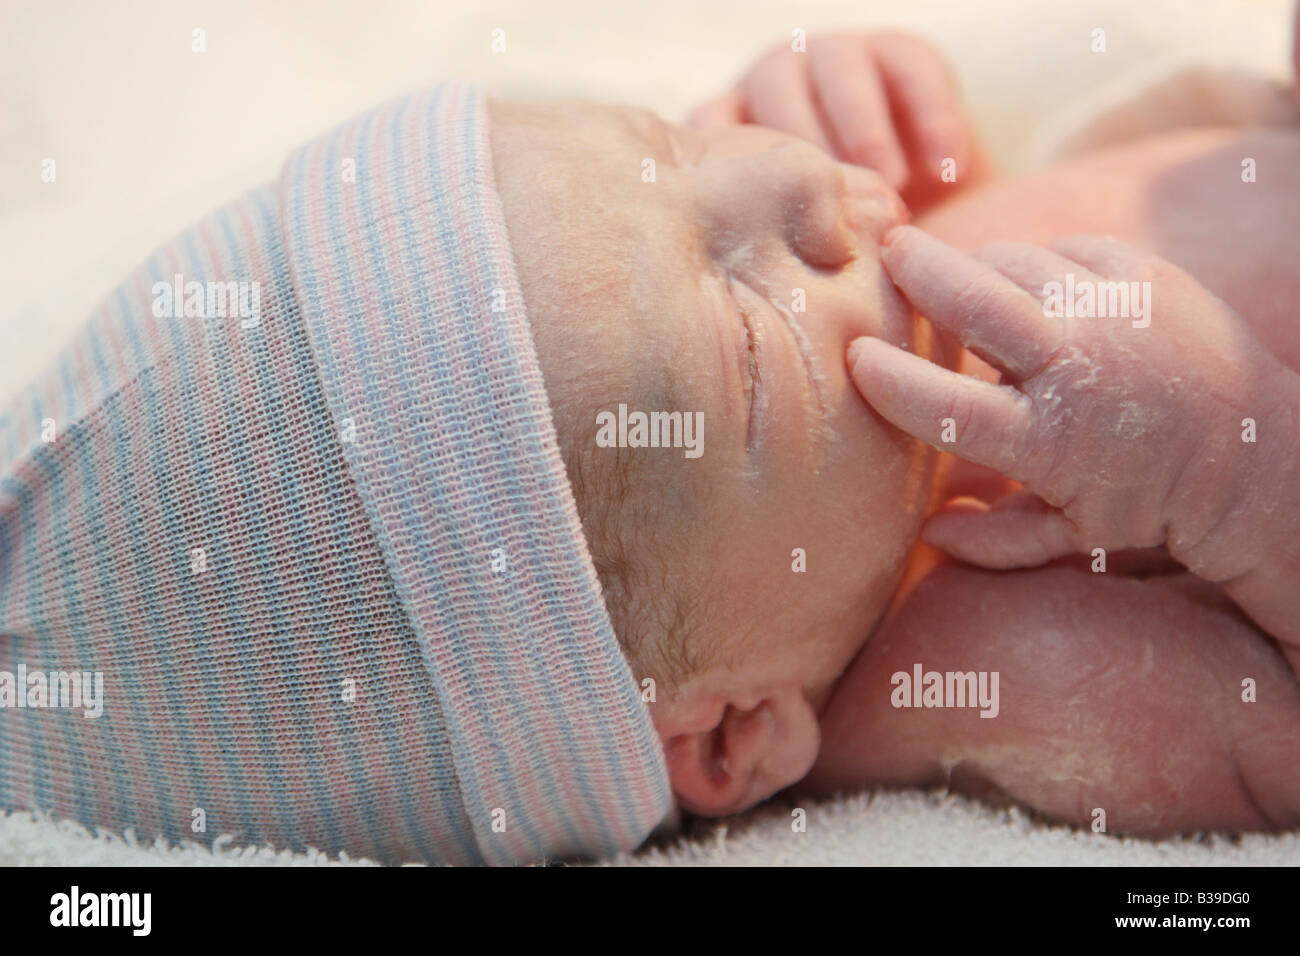 A Newborn Infant, Only Minutes Old Stock Photo